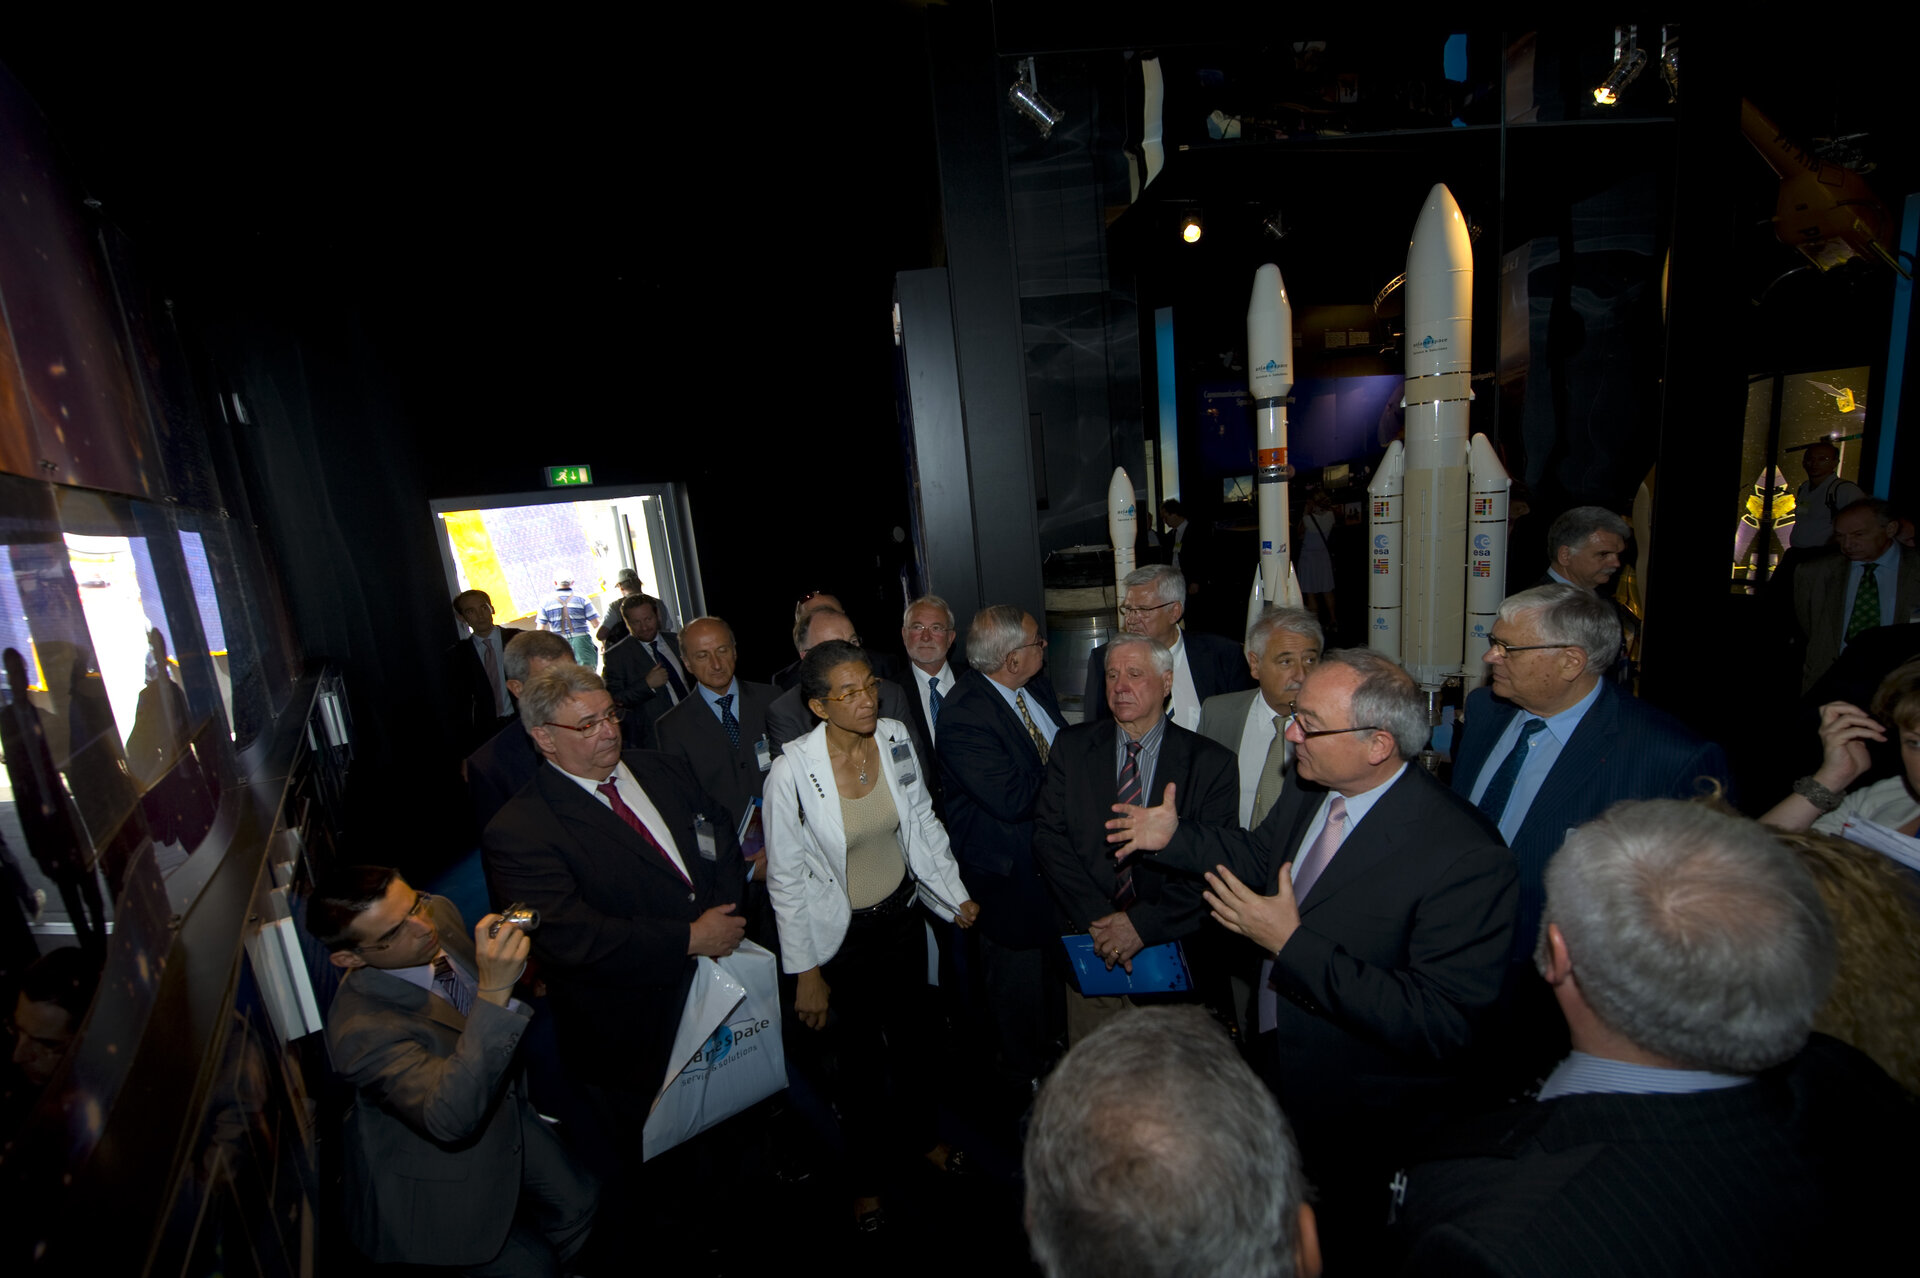 Members of the French Parliament visit ESA Pavilion